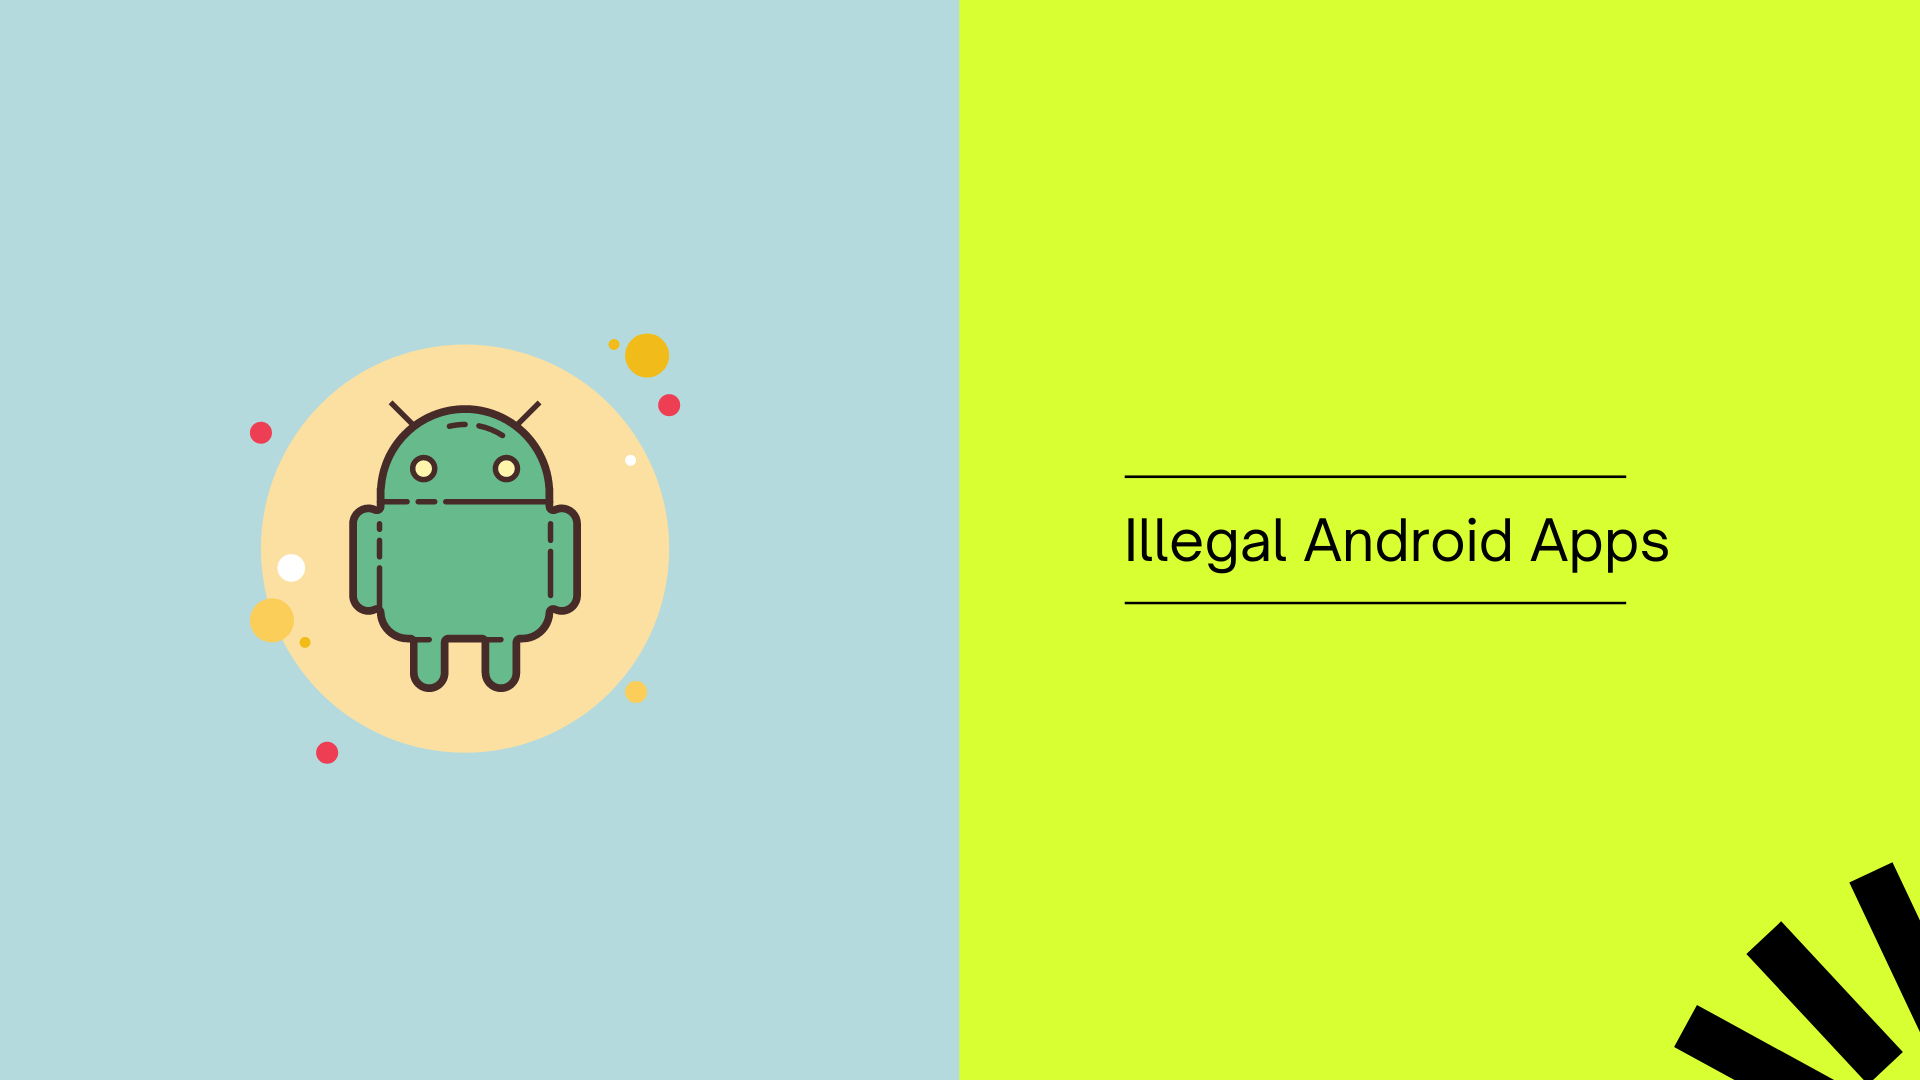 Illegal Android Apps